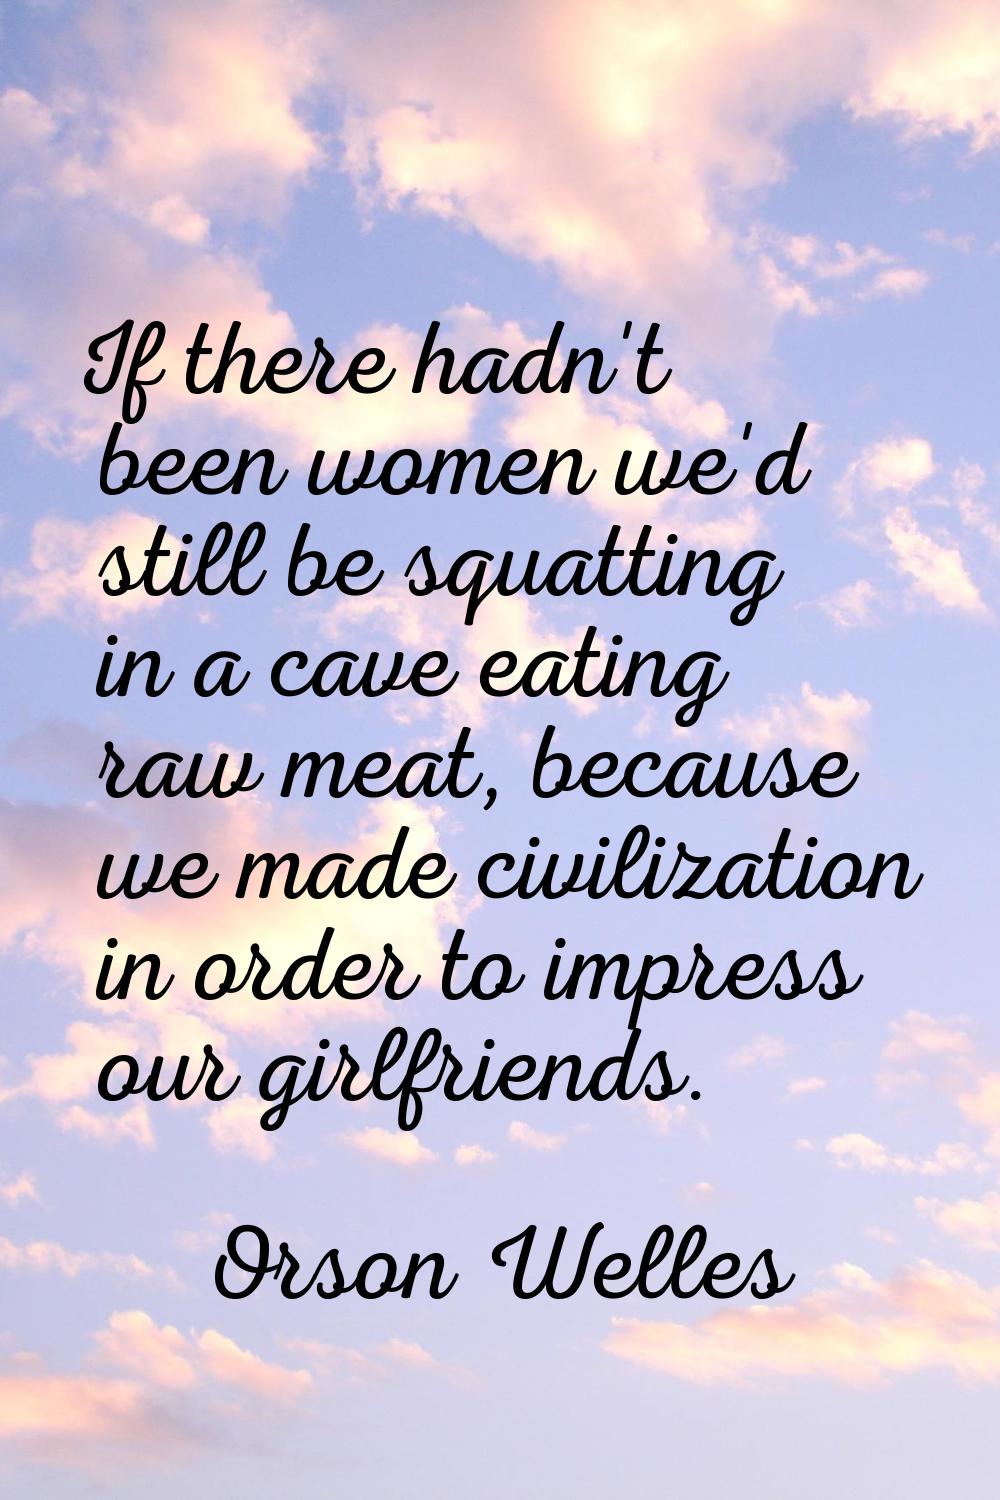 If there hadn't been women we'd still be squatting in a cave eating raw meat, because we made civil